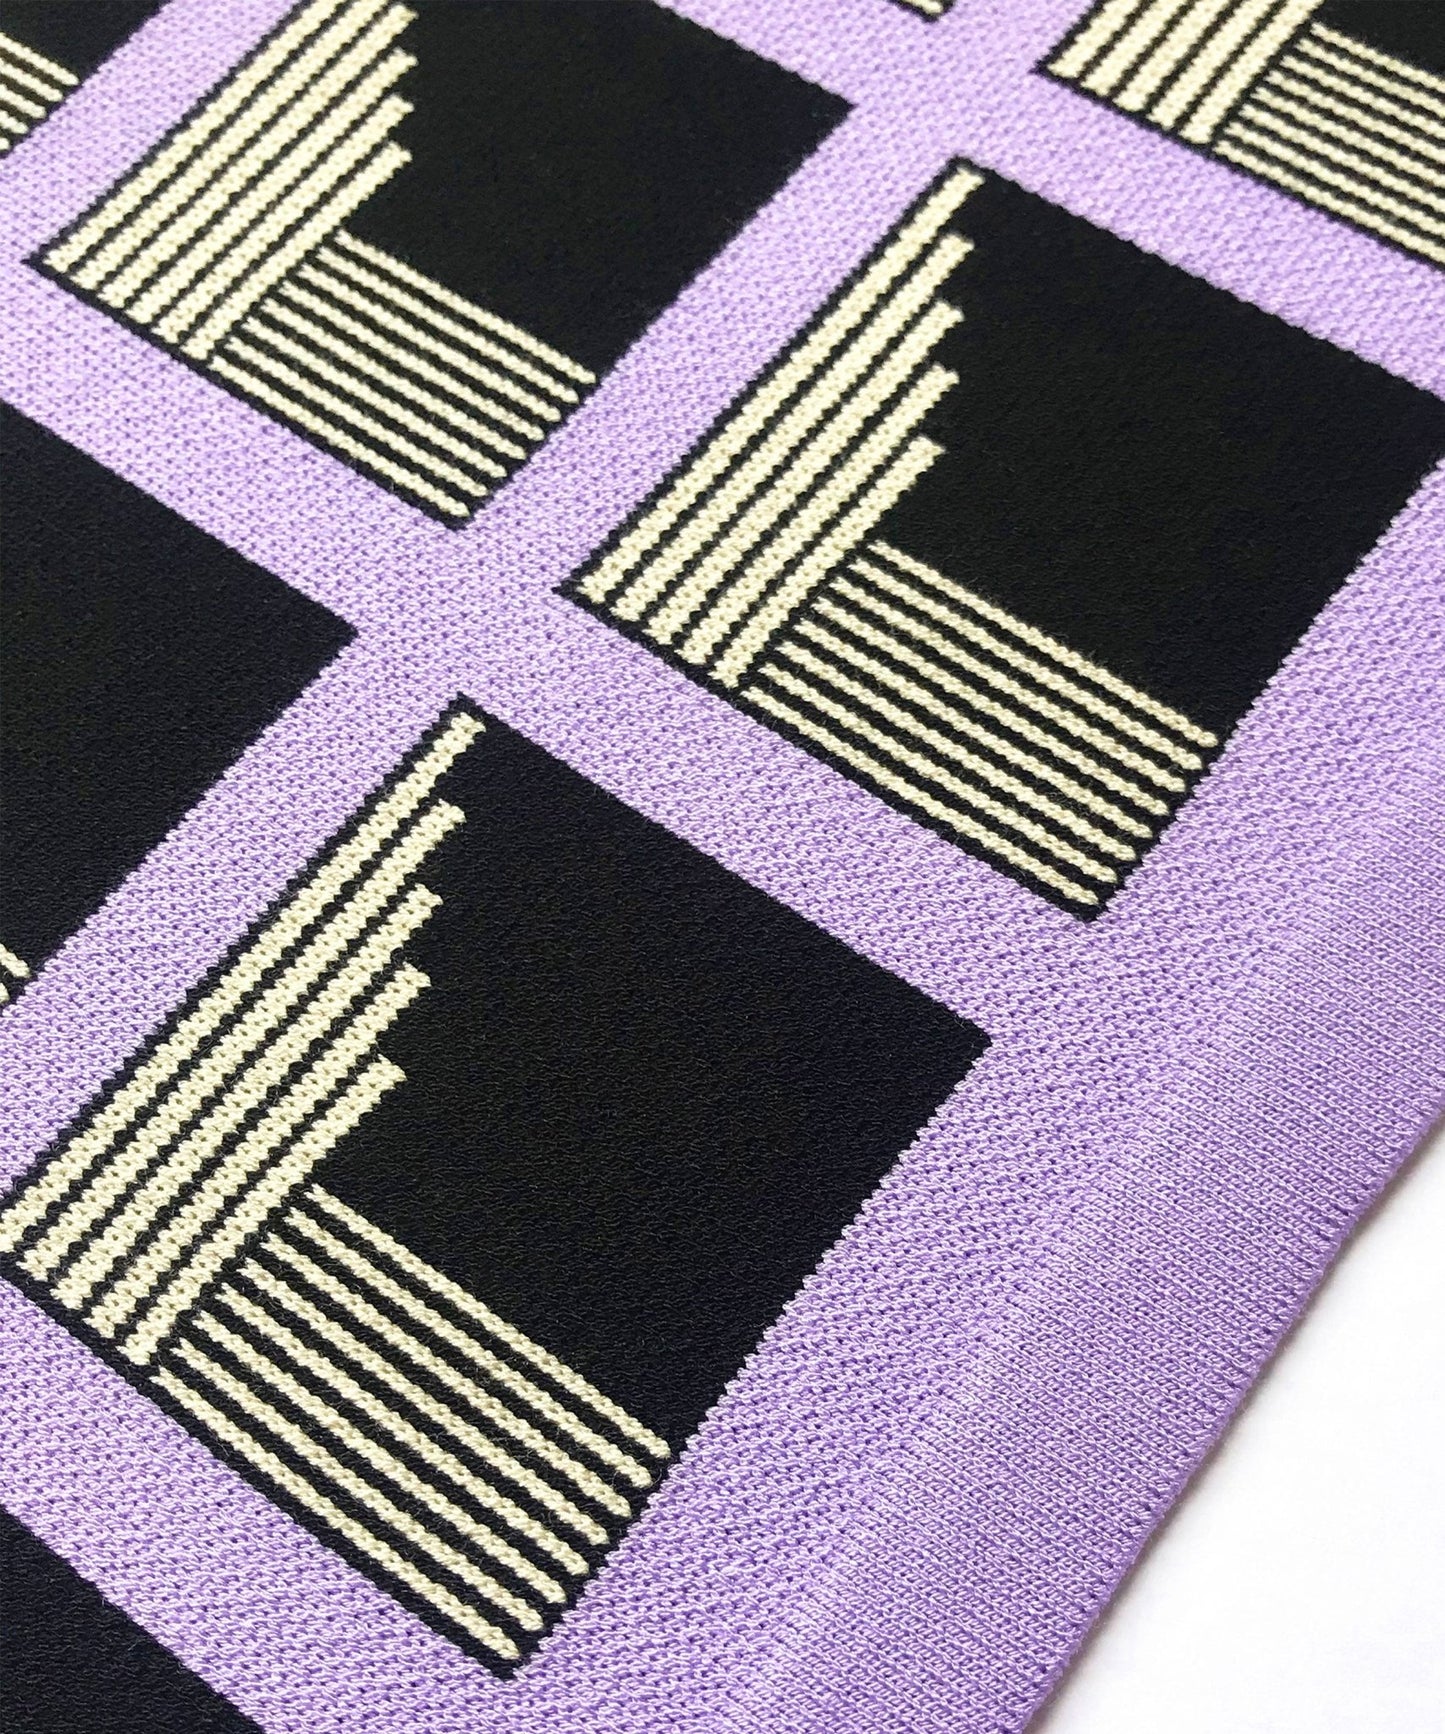 Camille Walala Placemat - knit detail 